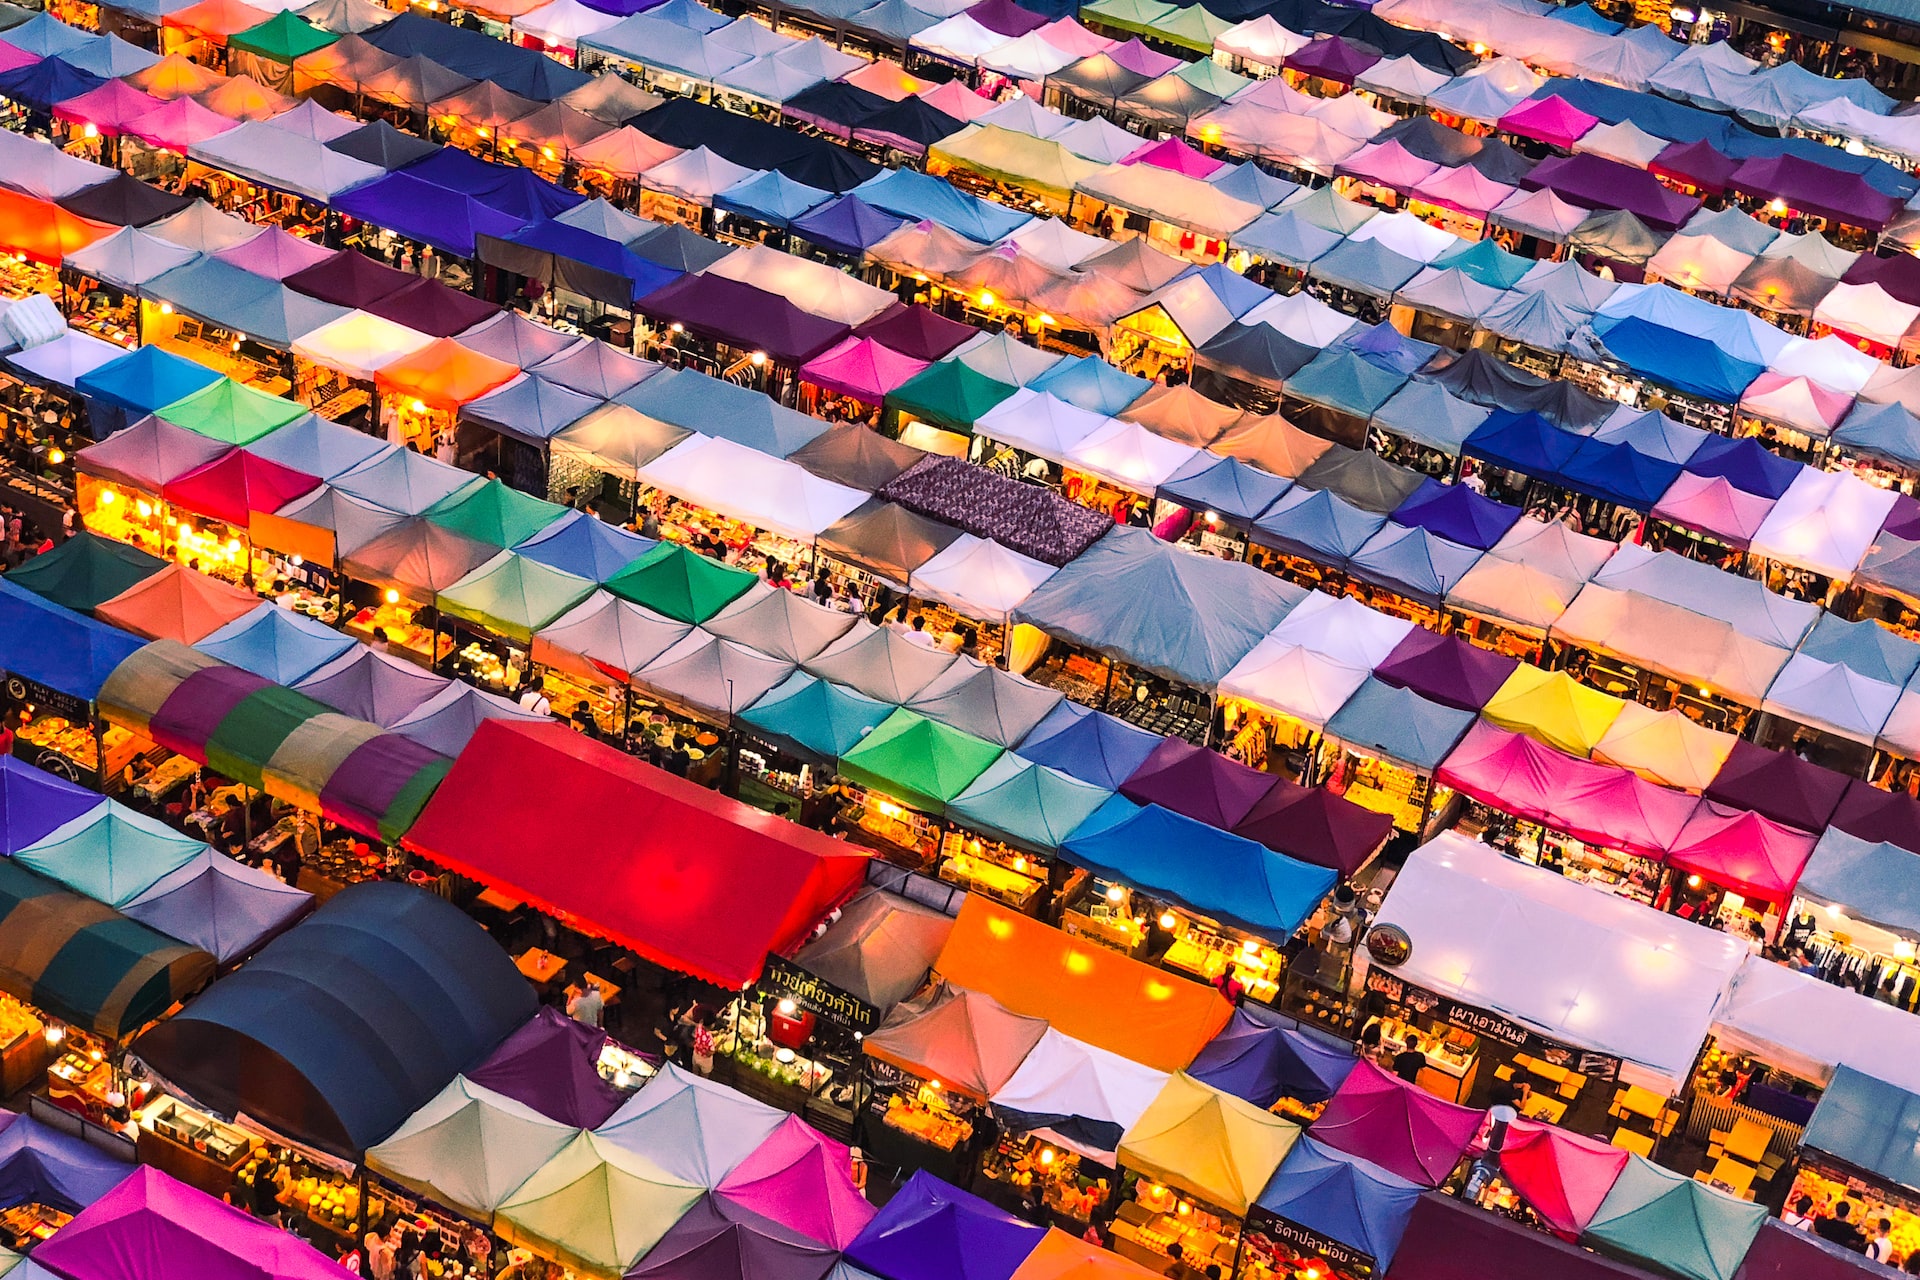 A bird's eye view of a market scene in Thailand; a patchwork of bright coloured stall coverings.